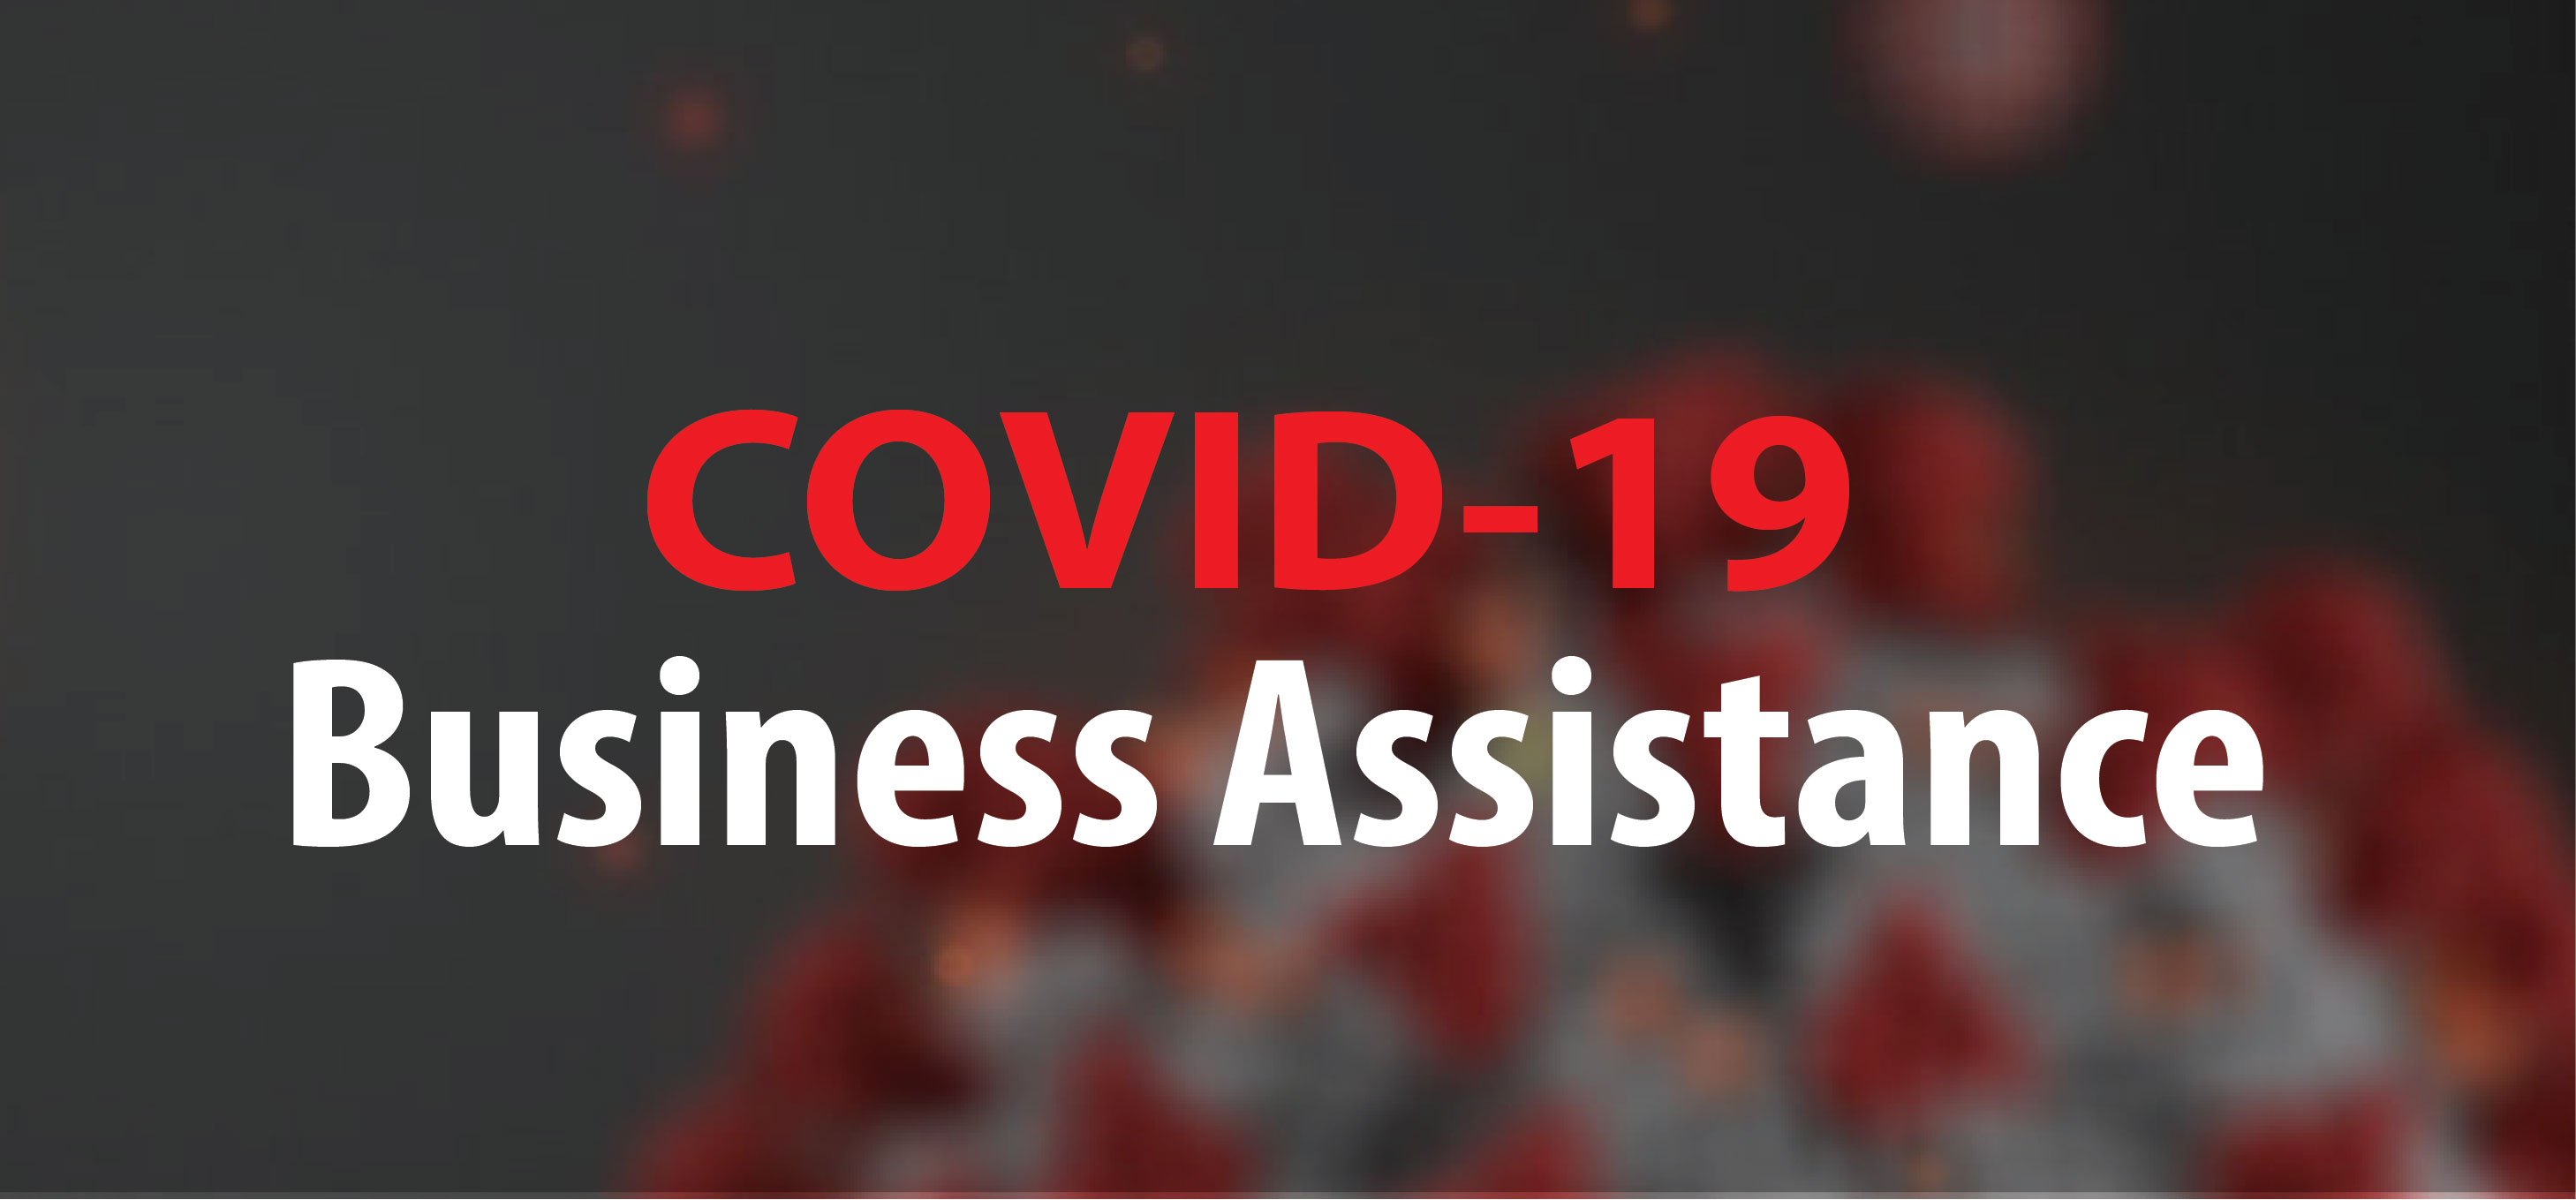 Covid19 business assistance